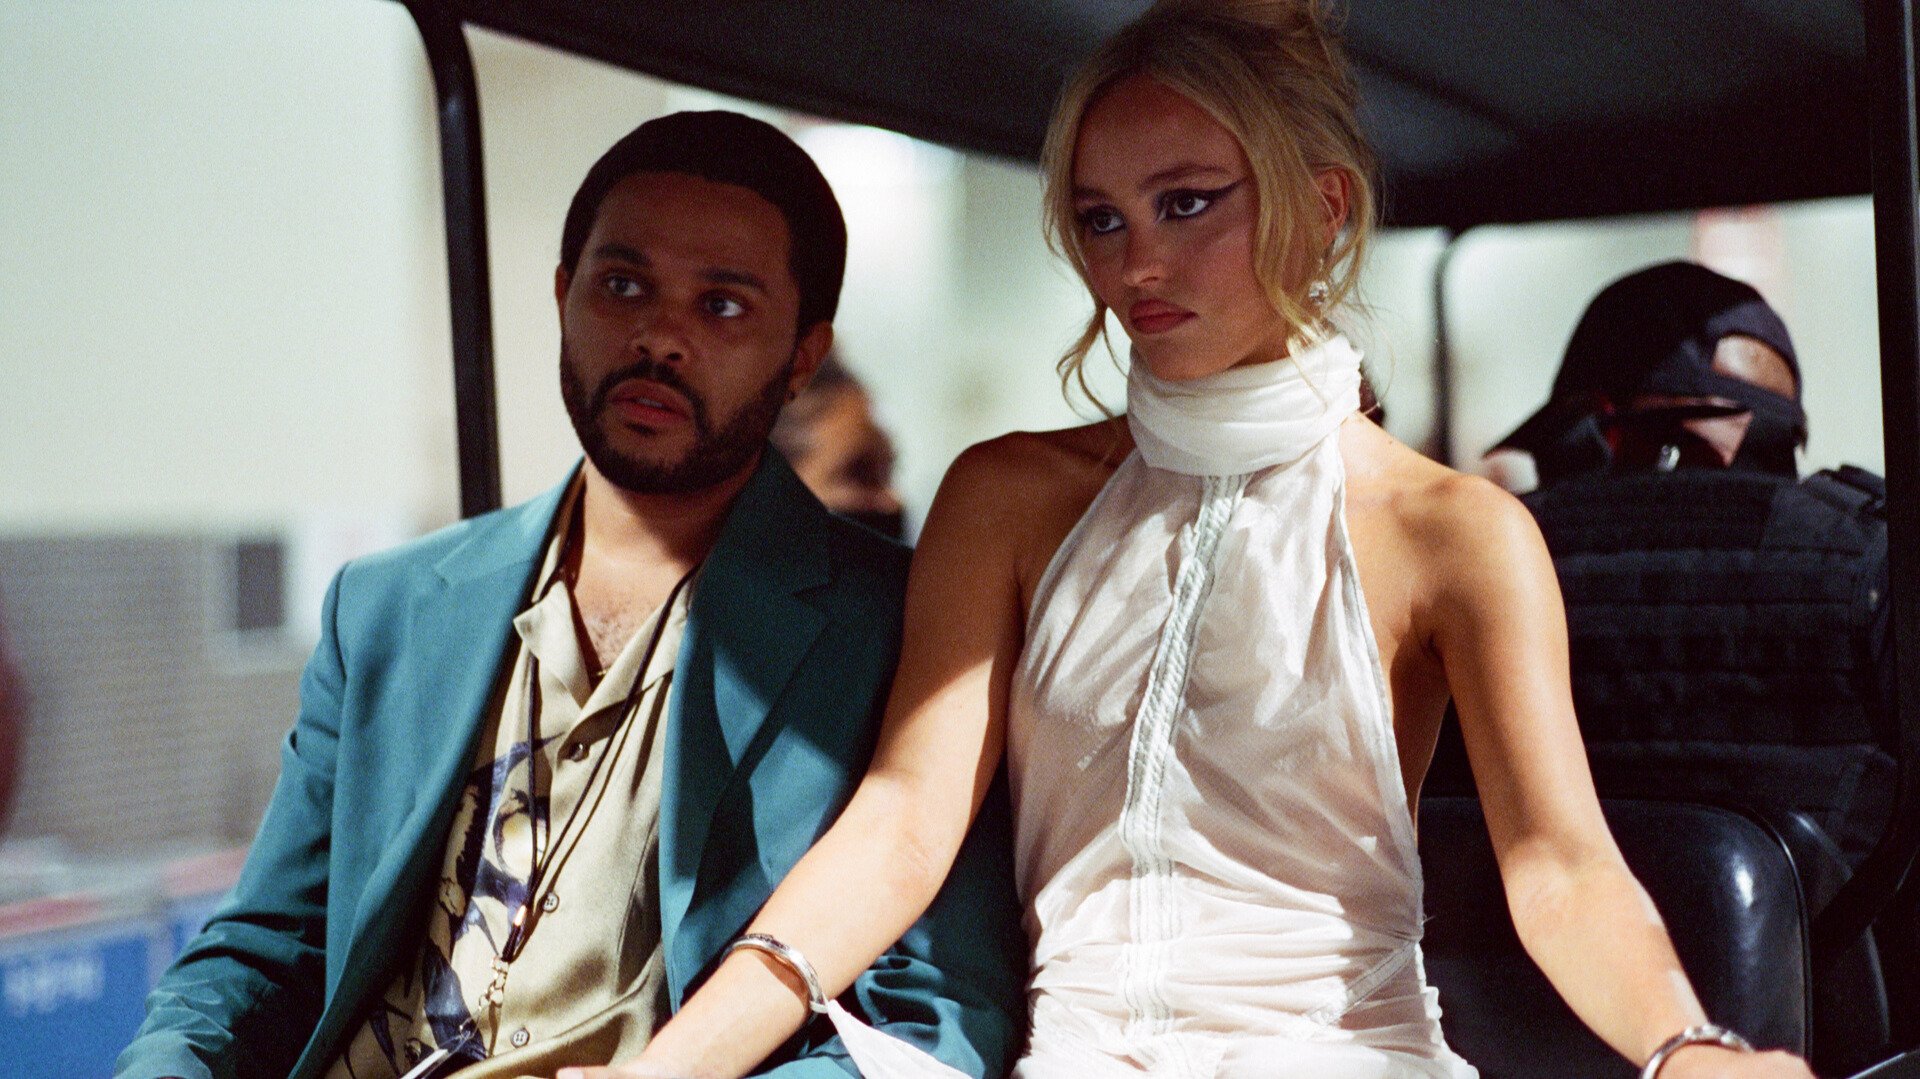 A man wearing a blue suit, and a woman wearing a white dress, sit in a golf cart inside a stadium's hallways. 